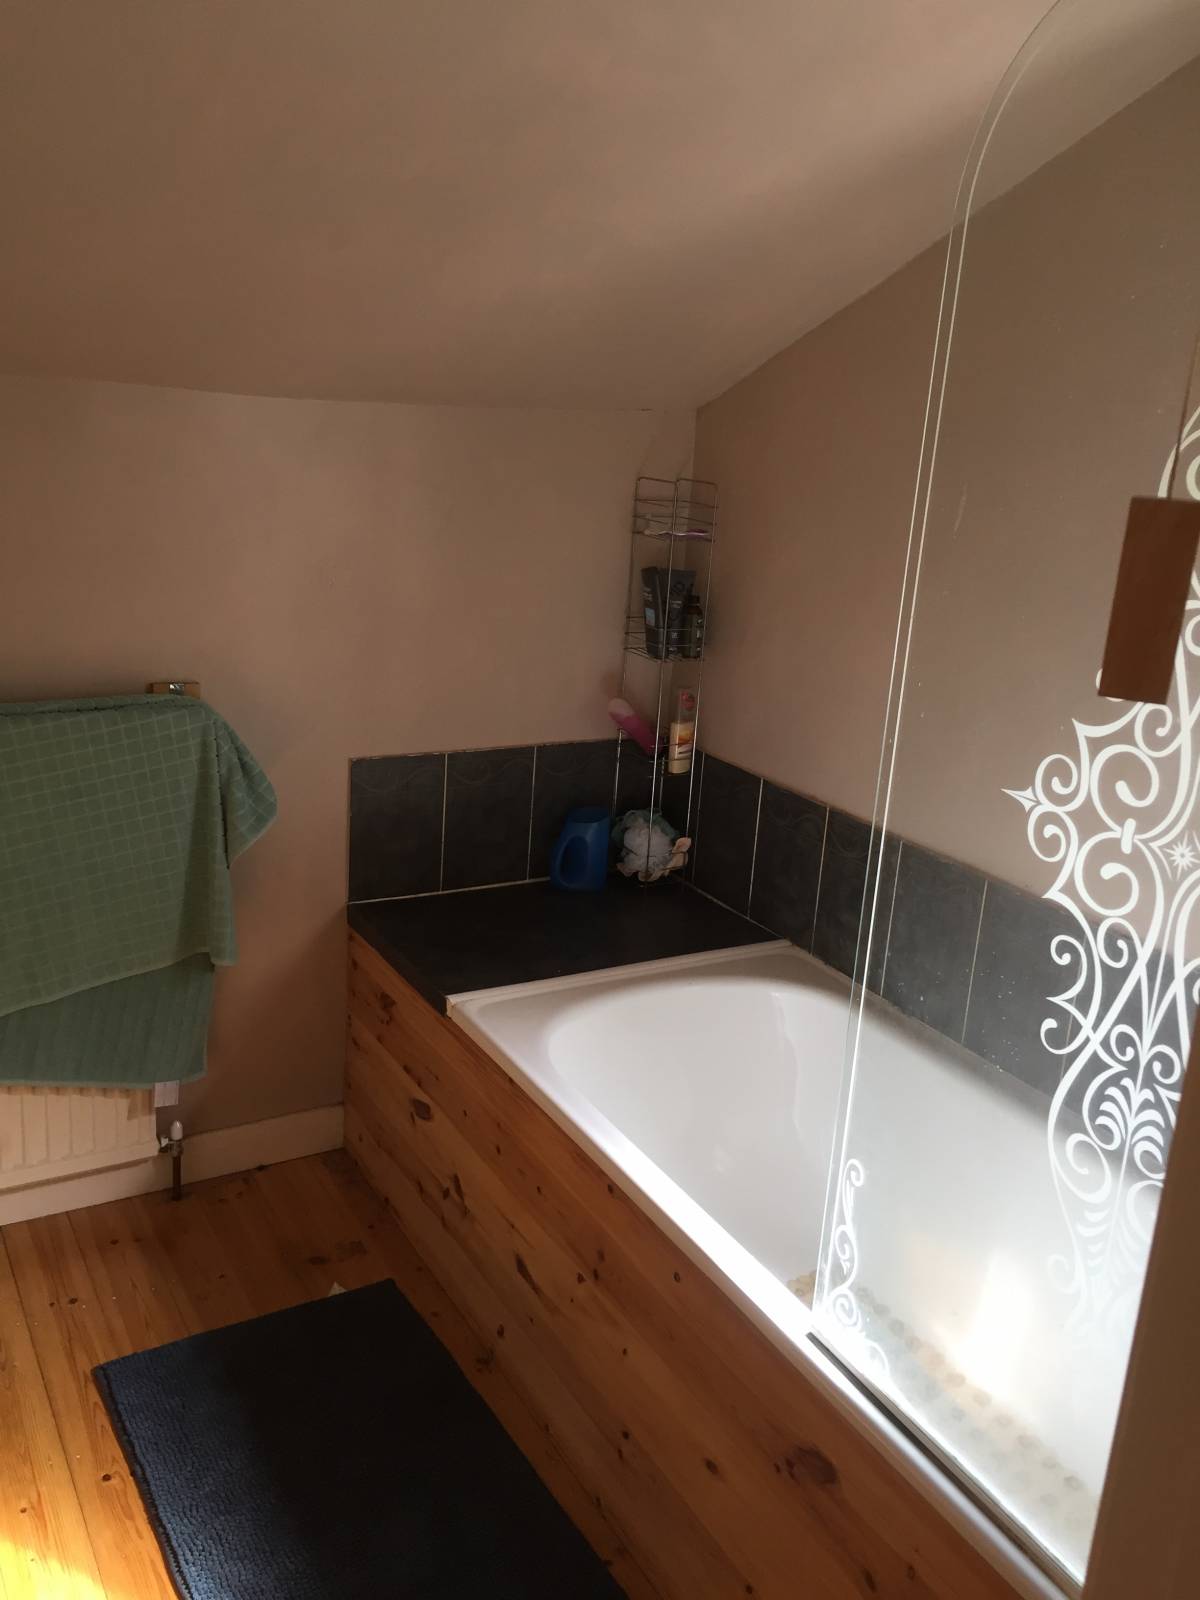 ** IDEAL FAMILY HOME / STARTER HOME ** 2 Double Bedroom. 2 Reception. Double Glazed. Garden. Fully reburbished decoration. New carpets to x2 reception rooms & stairs.